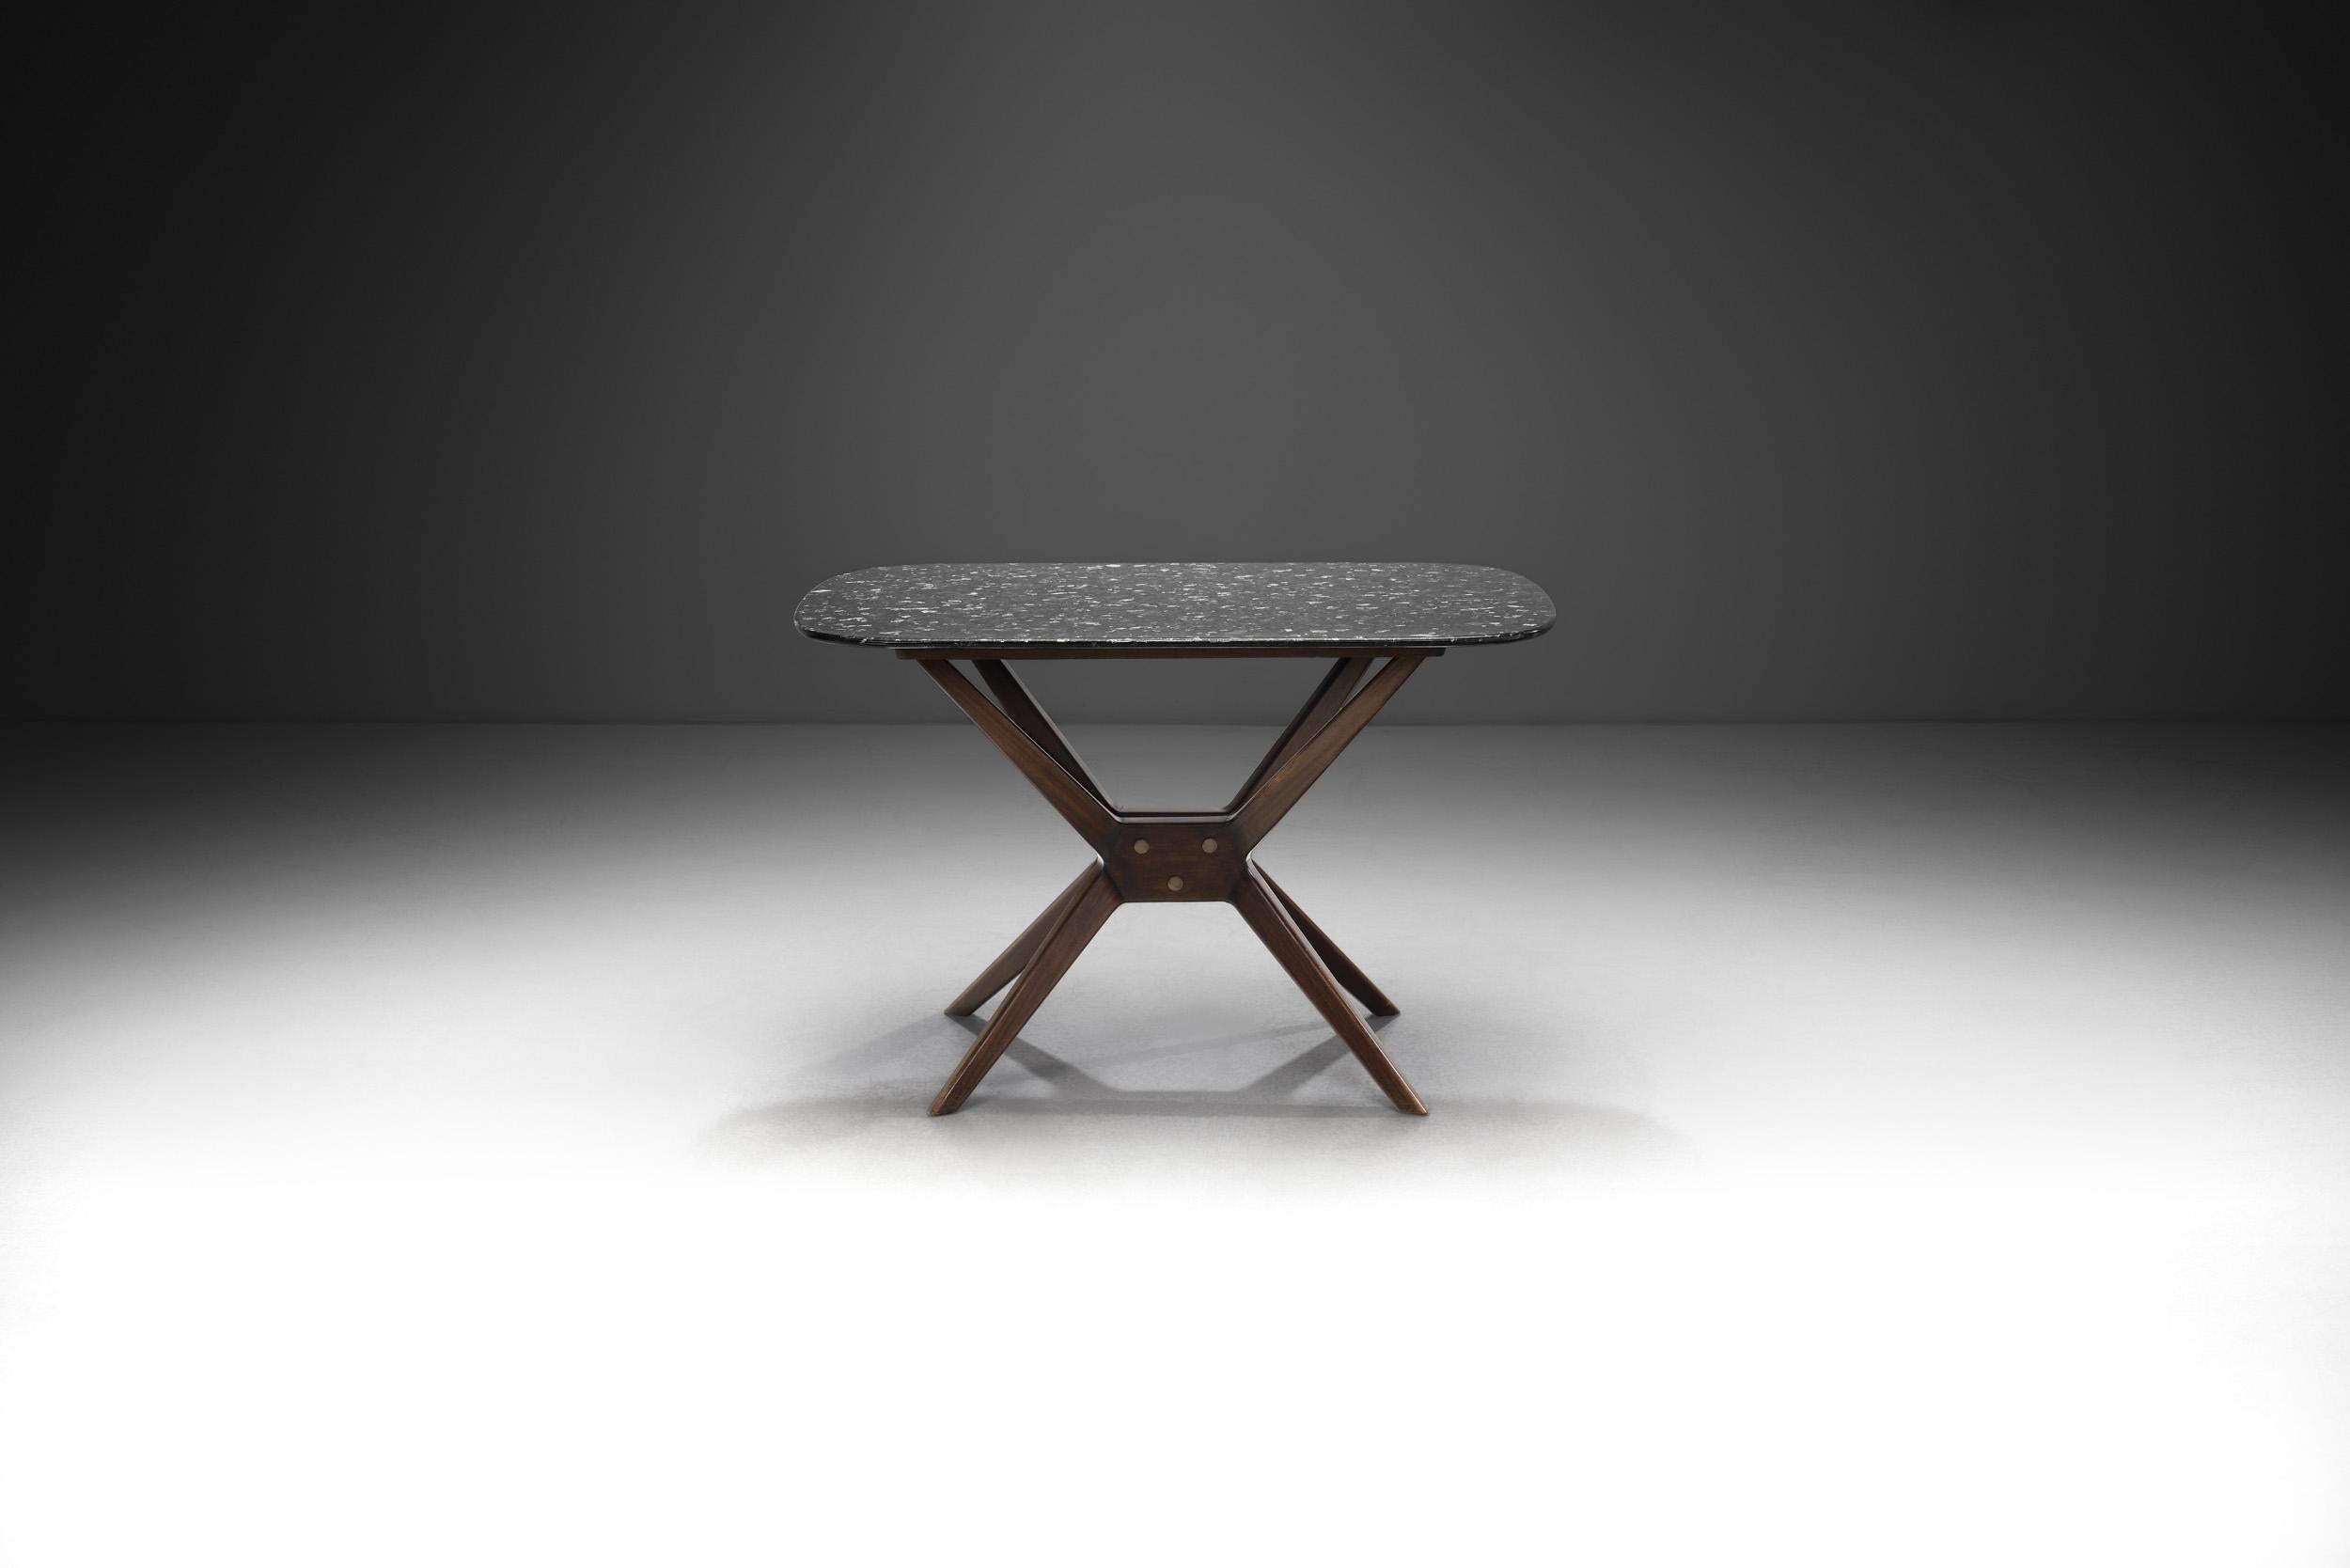 Scandinavian Modern Swedish Wooden Table with Oblique Legs and Stone Top, Sweden, circa 1960s For Sale